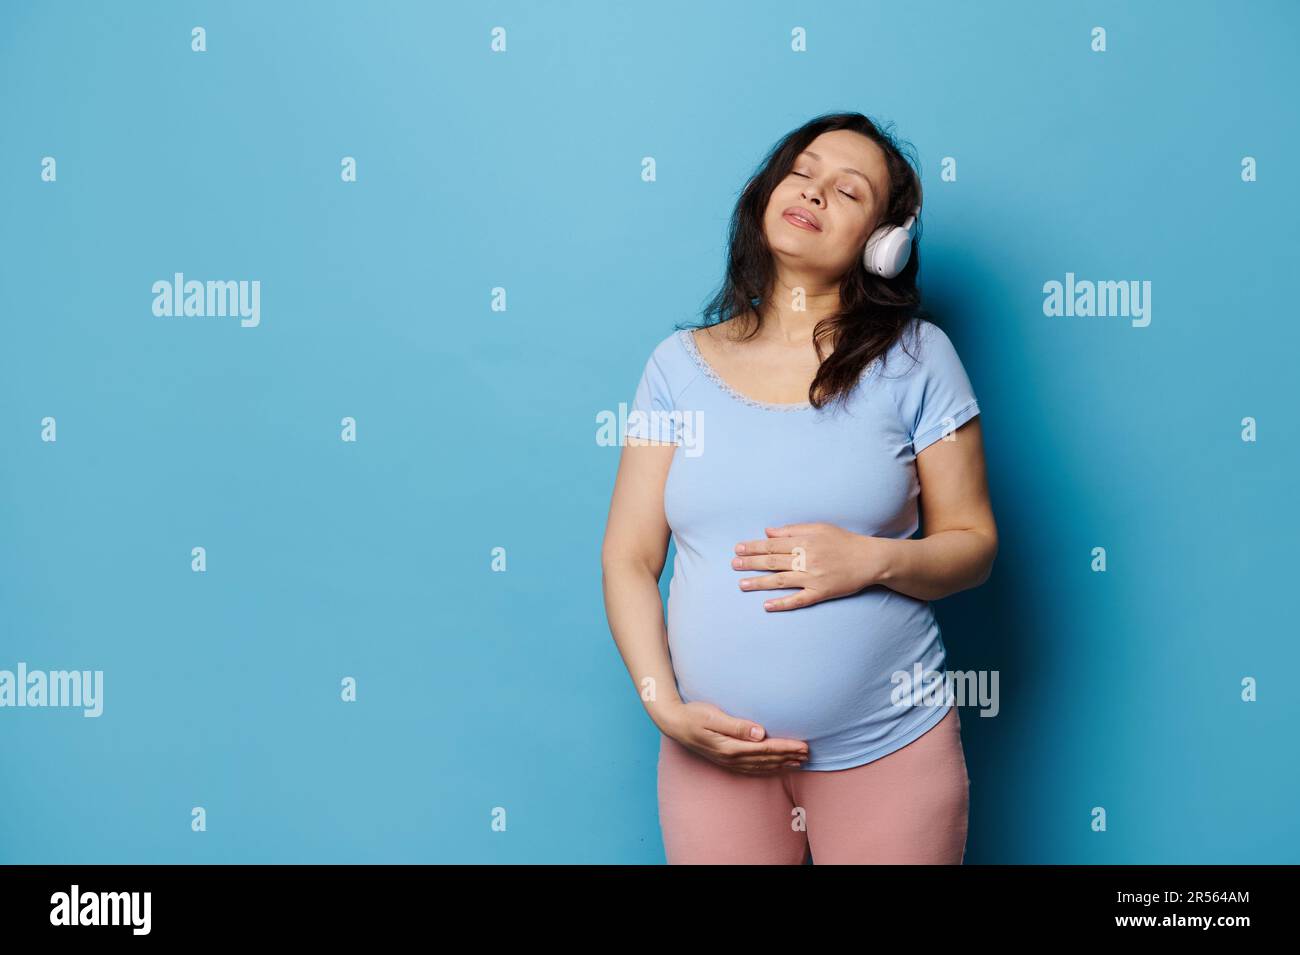 Future Mom holding headphones on her big belly, while her unborn baby  listening pleasant sounds and melody. First Child Anticipation Stock Photo  - Alamy